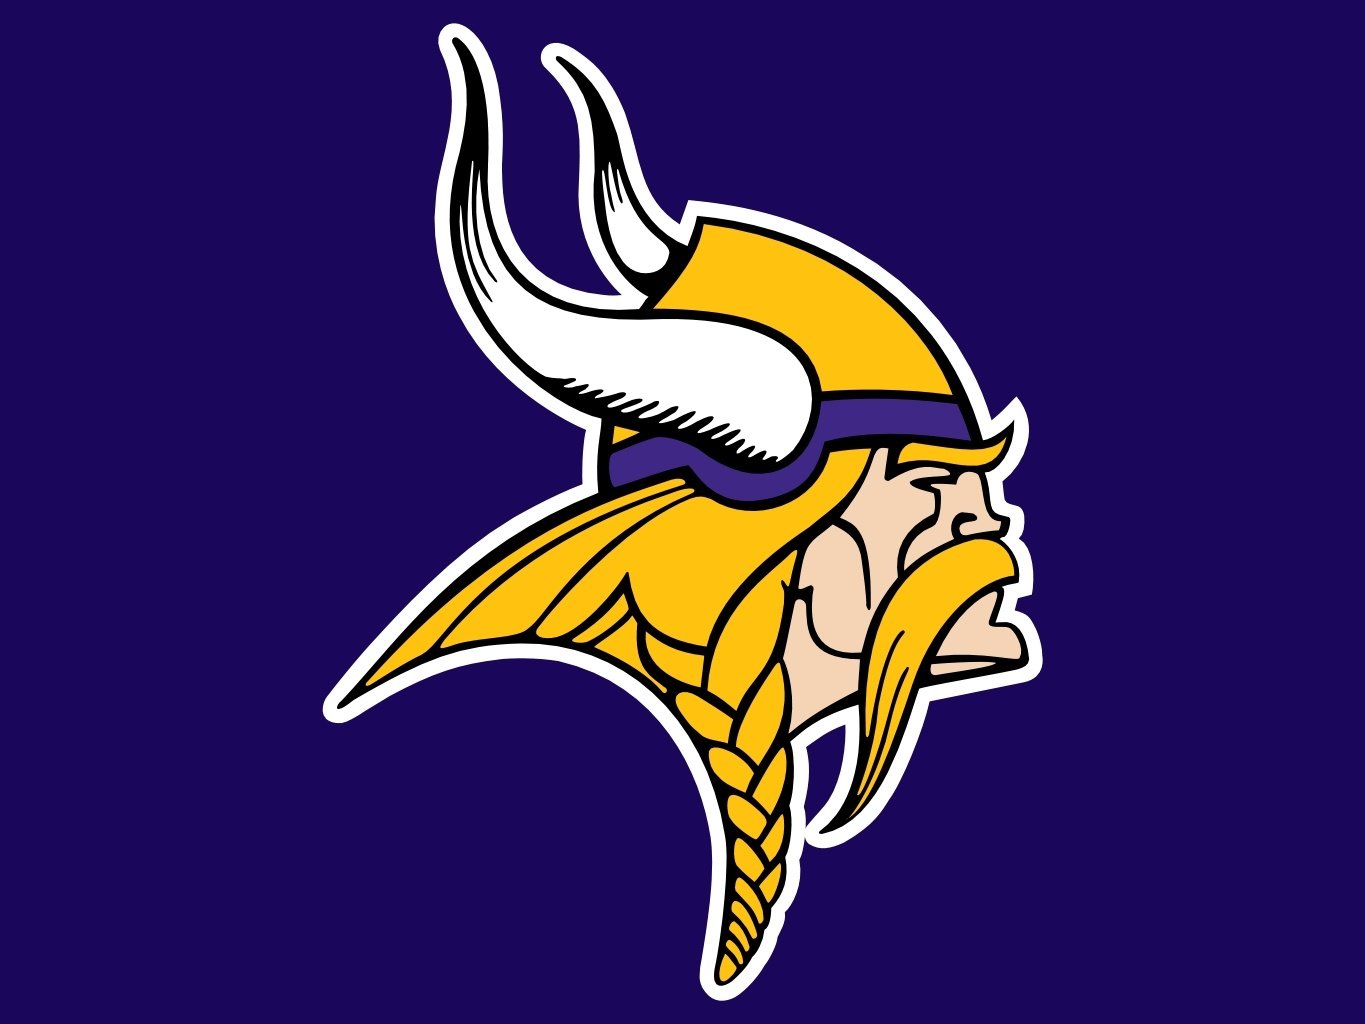 Why No Vikings vs Eagles Over-The-Air Broadcast Locally? - KVRR Local News